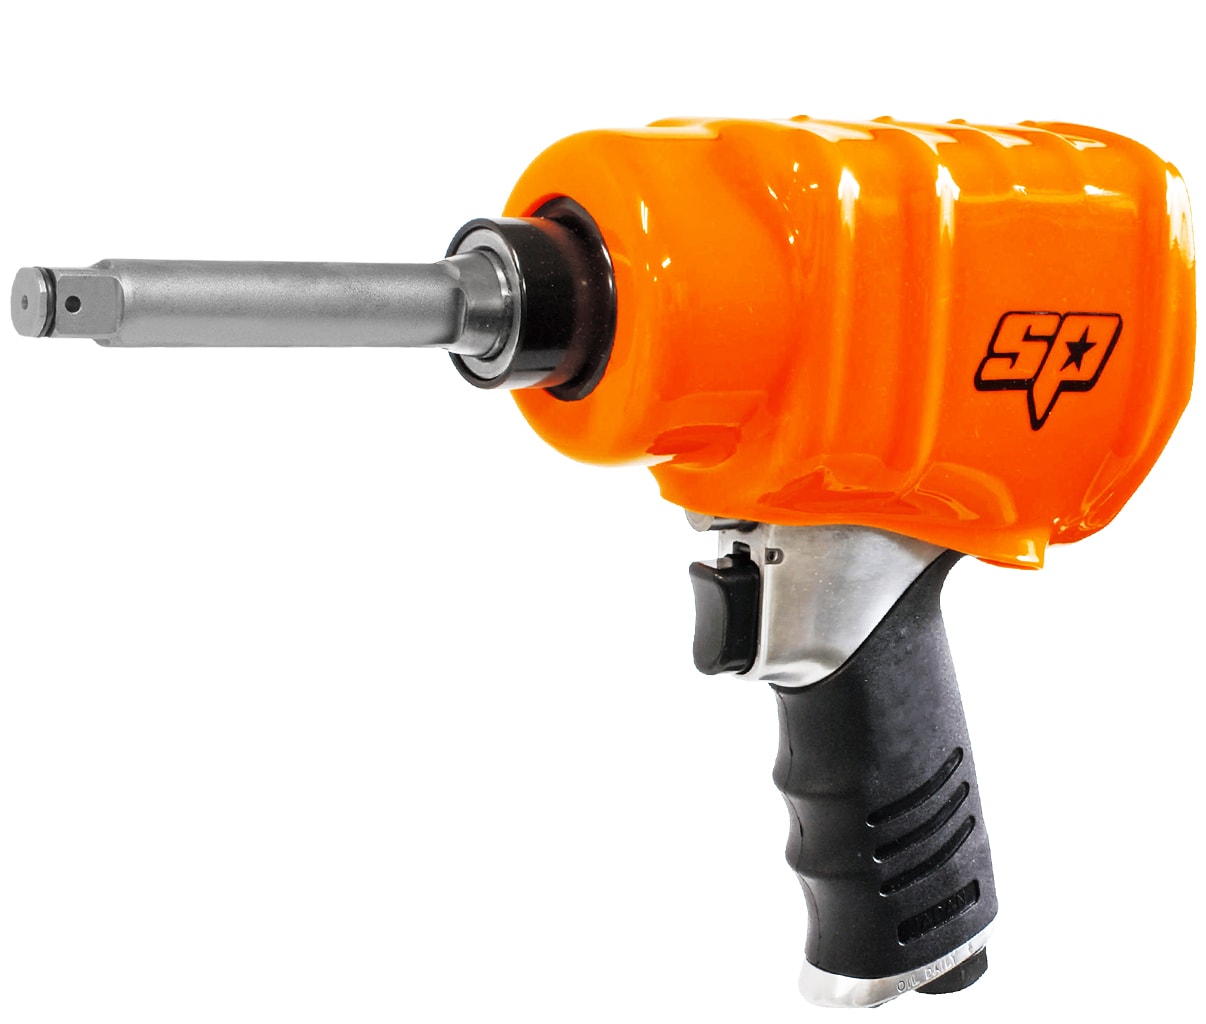 1/2" Drive Impact Wrench by SP Tools